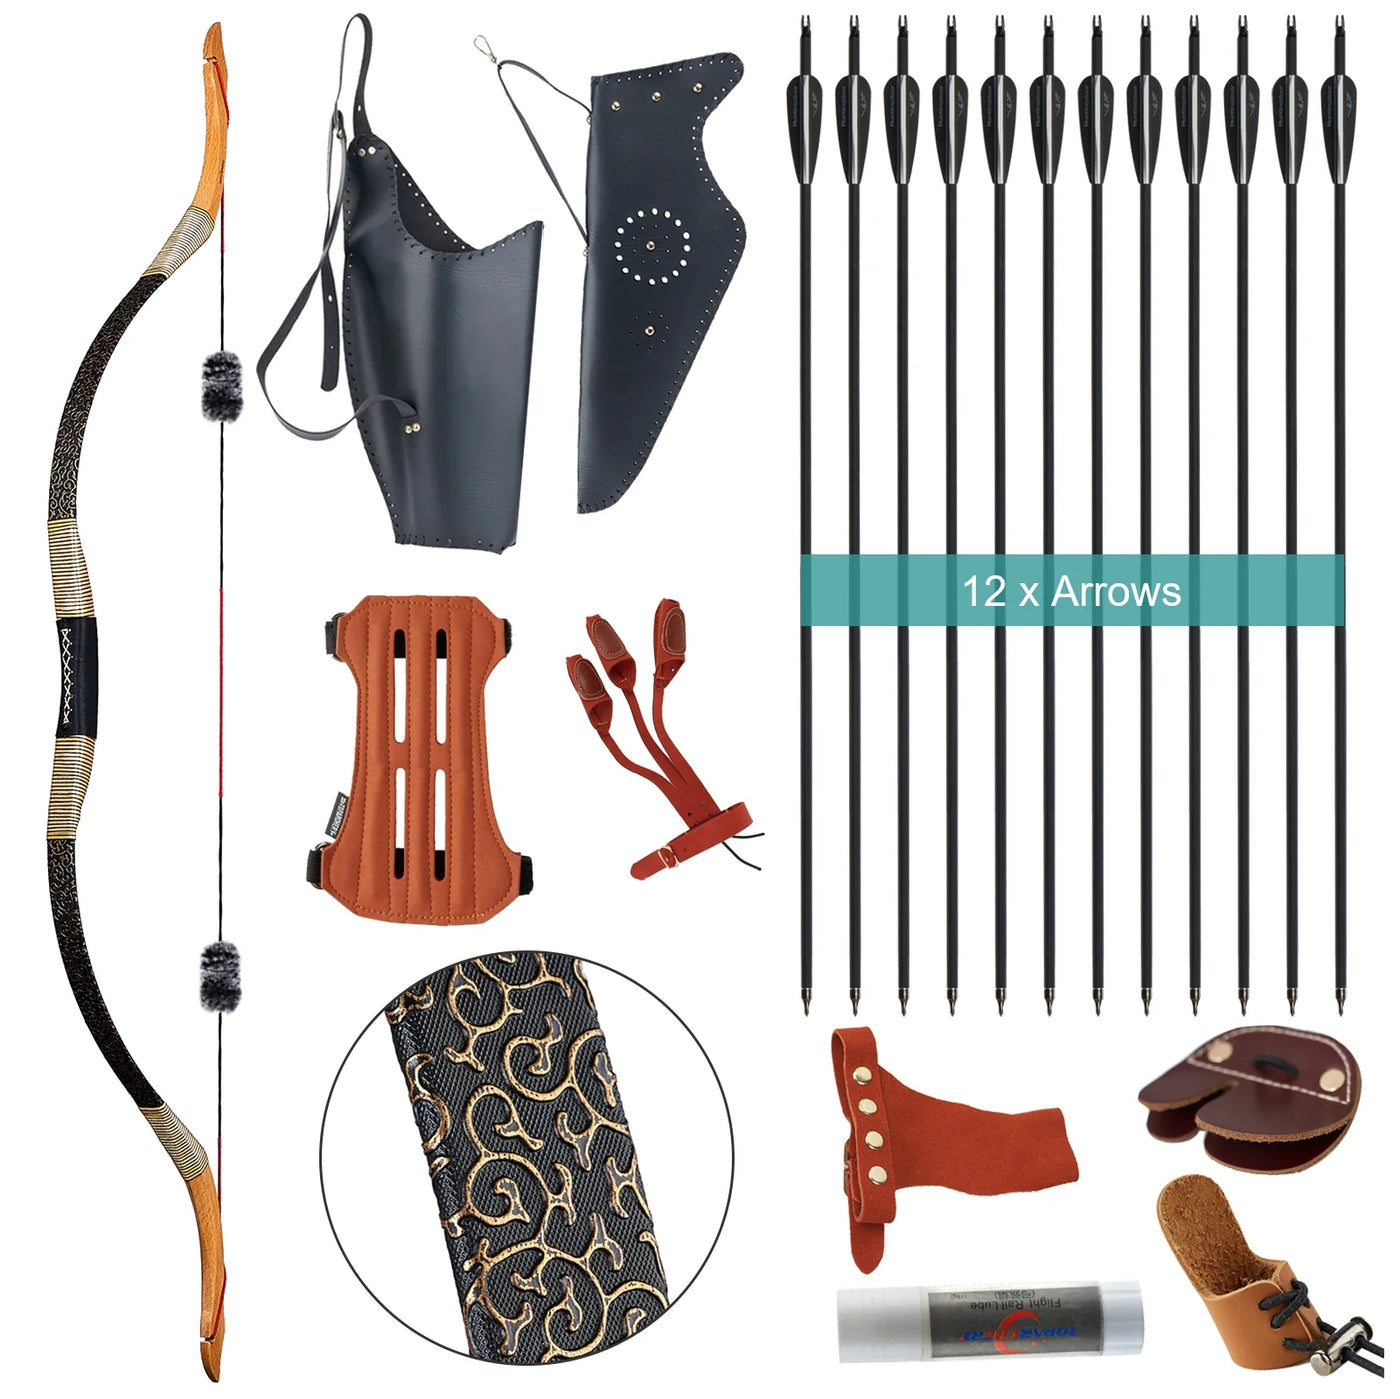 Mongolian Traditional Recurve Bow Carbon Arrows Kit Bow Bag Archery Hunting Target Recreational Camping Hiking